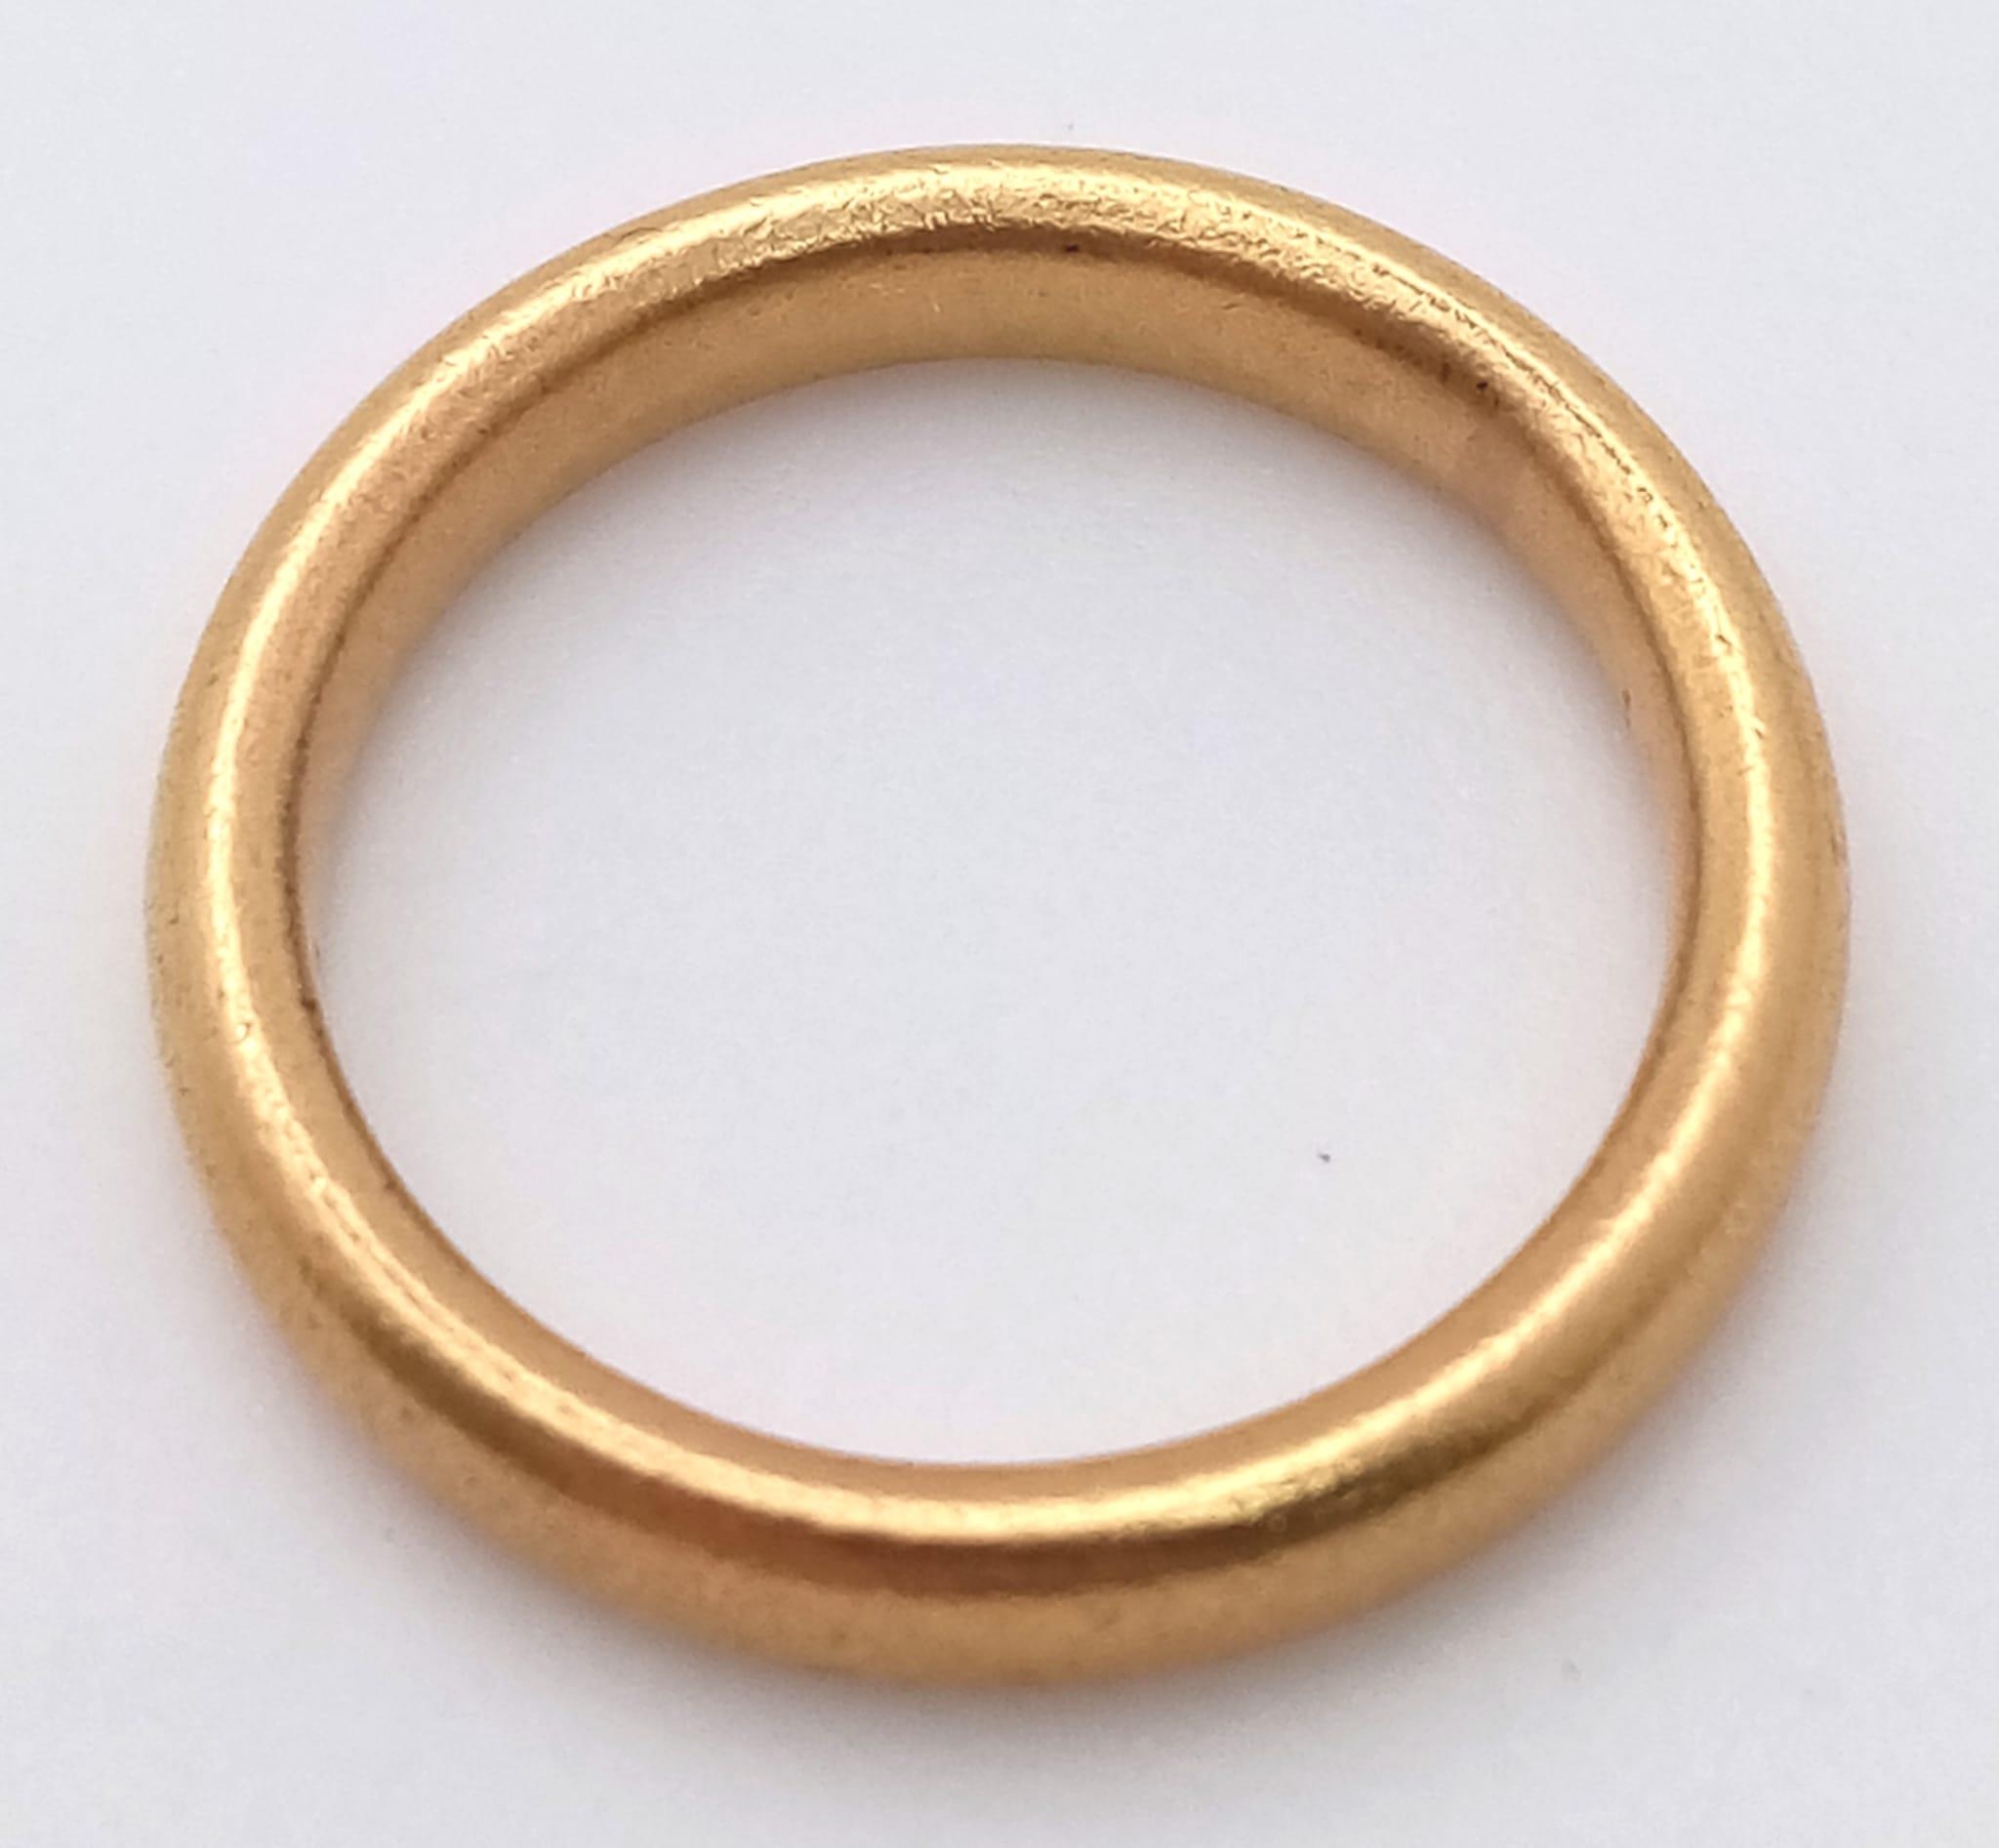 A Vintage 22K Yellow Gold Band Ring. 3mm width. Size K. 5.47g weight. Full UK hallmarks. - Image 3 of 4